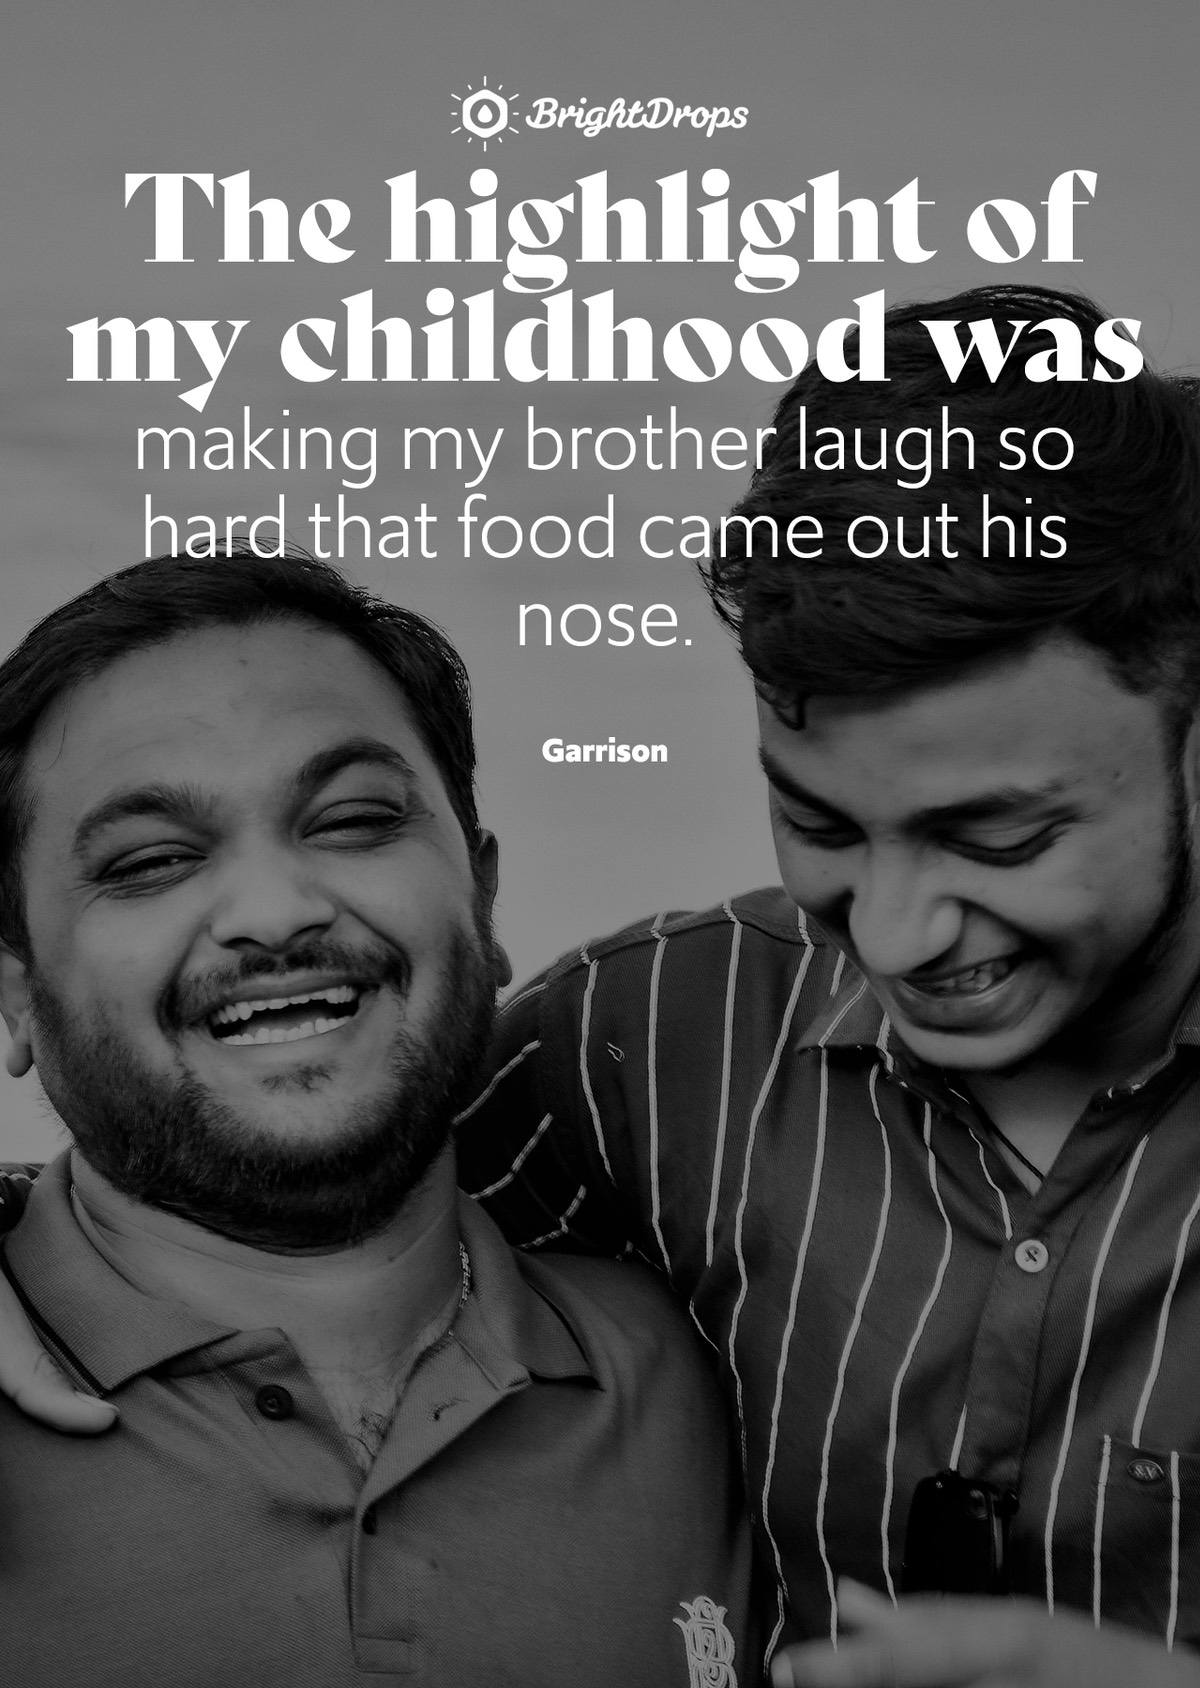 19 Funny Quotes All Brothers Can Relate To - Bright Drops